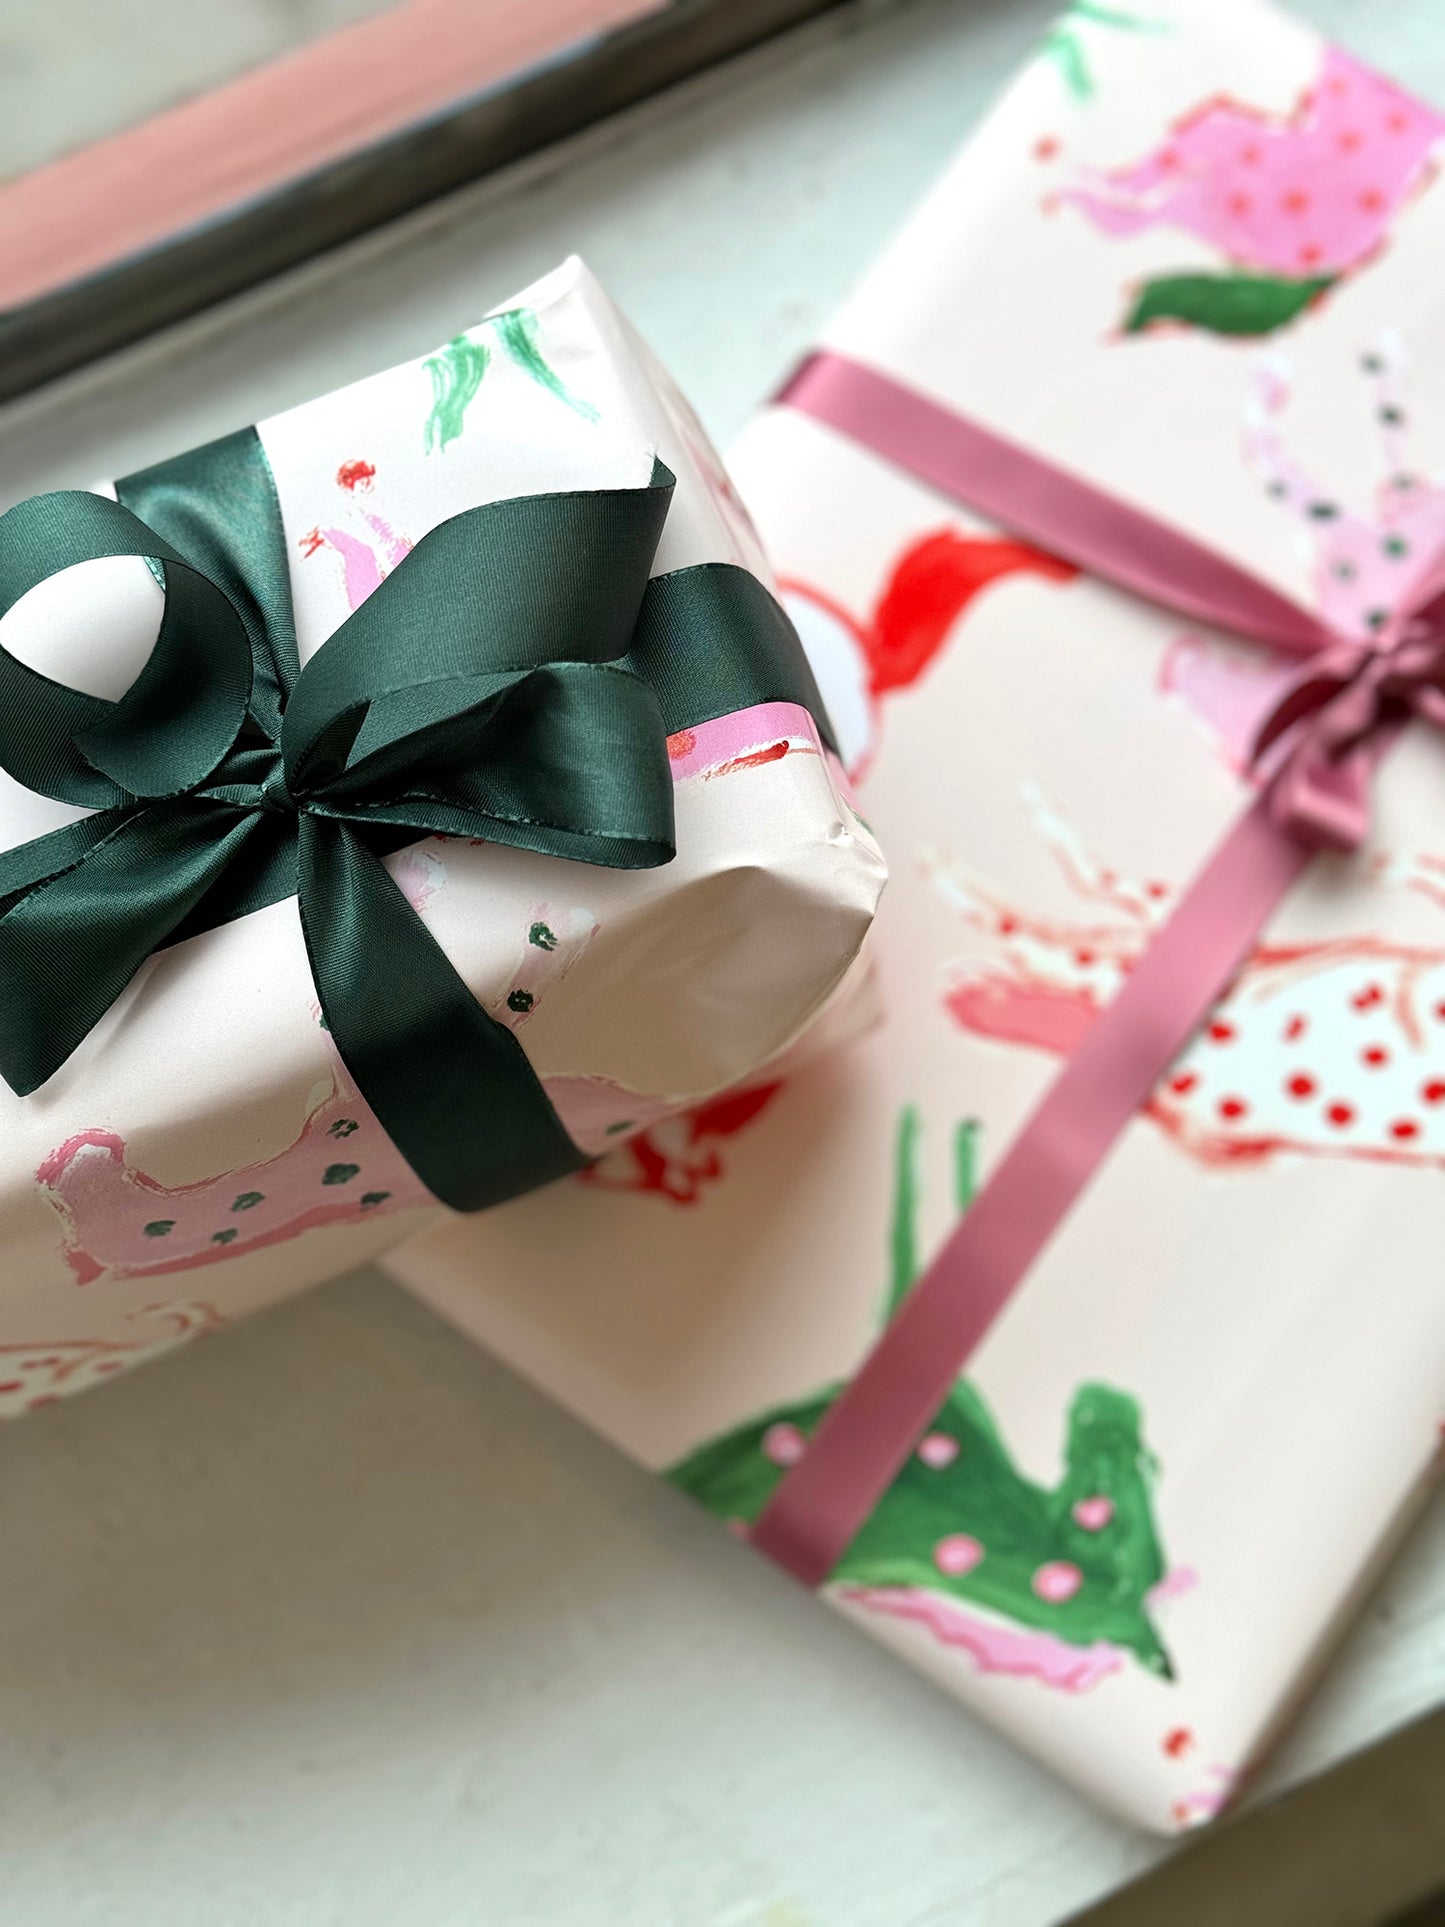 Whimsical Horses Wrapping Paper